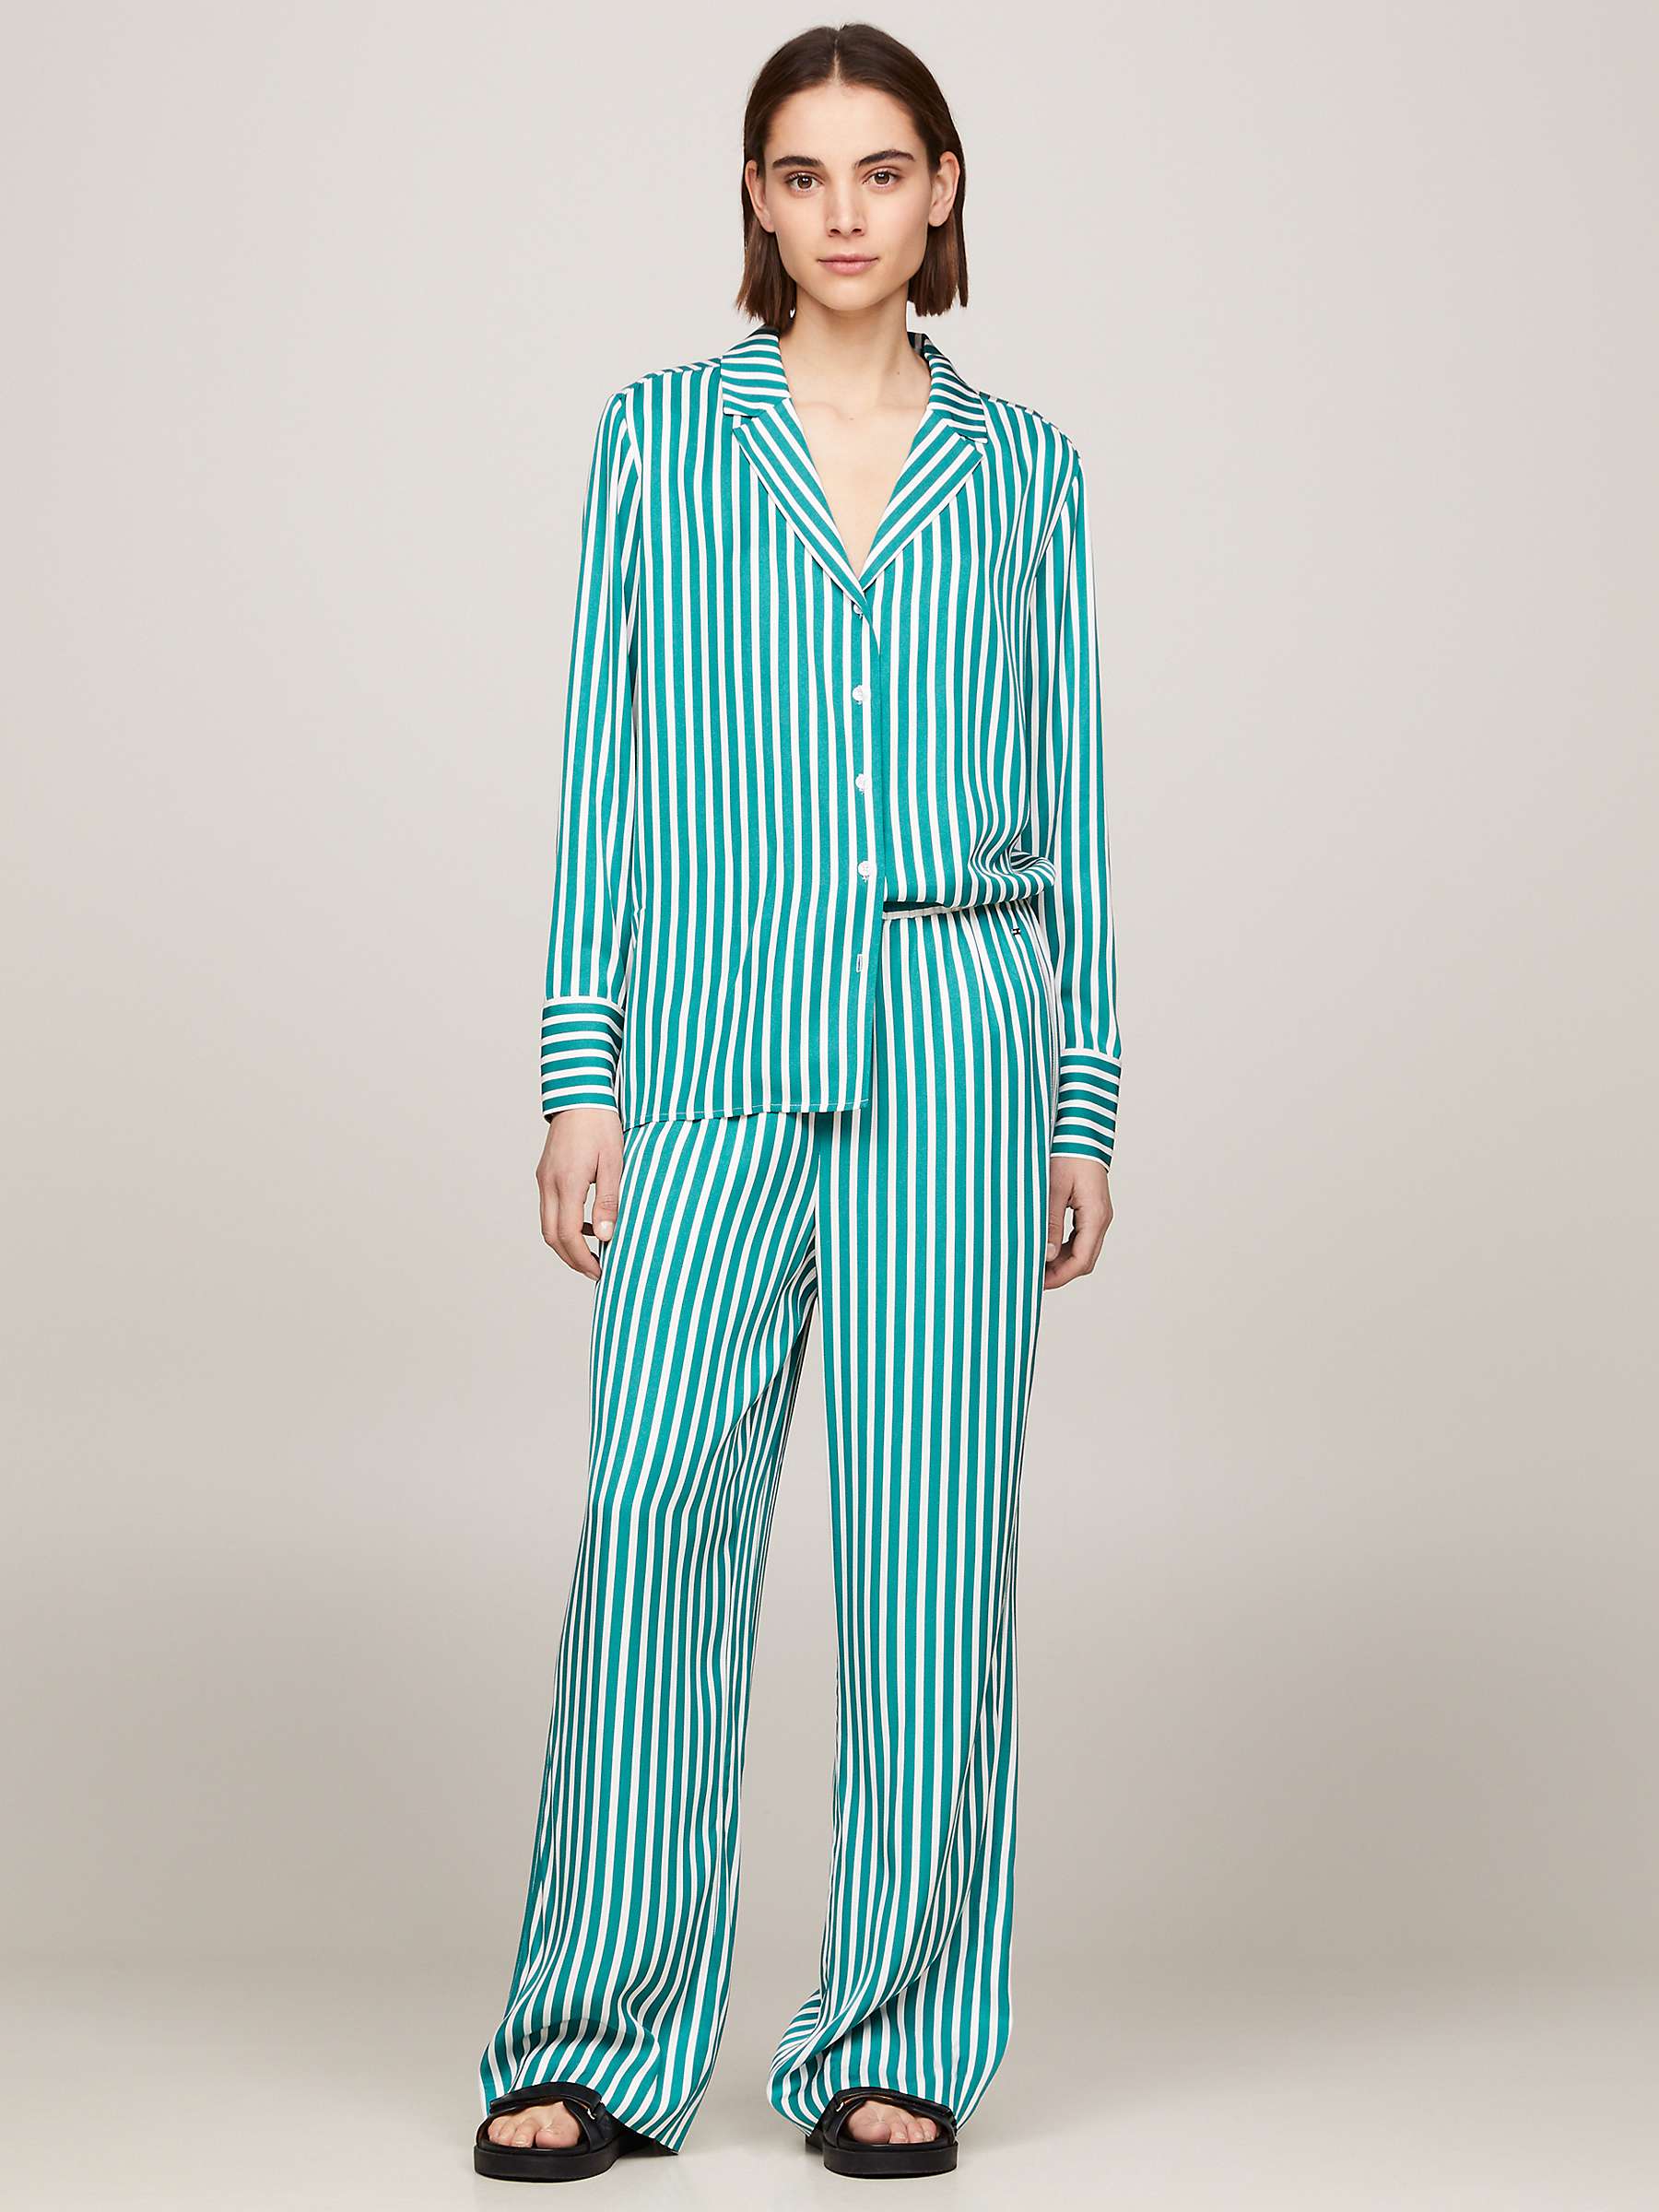 Buy Tommy Hilfiger Fluid Stripe Trousers, Green/White Online at johnlewis.com